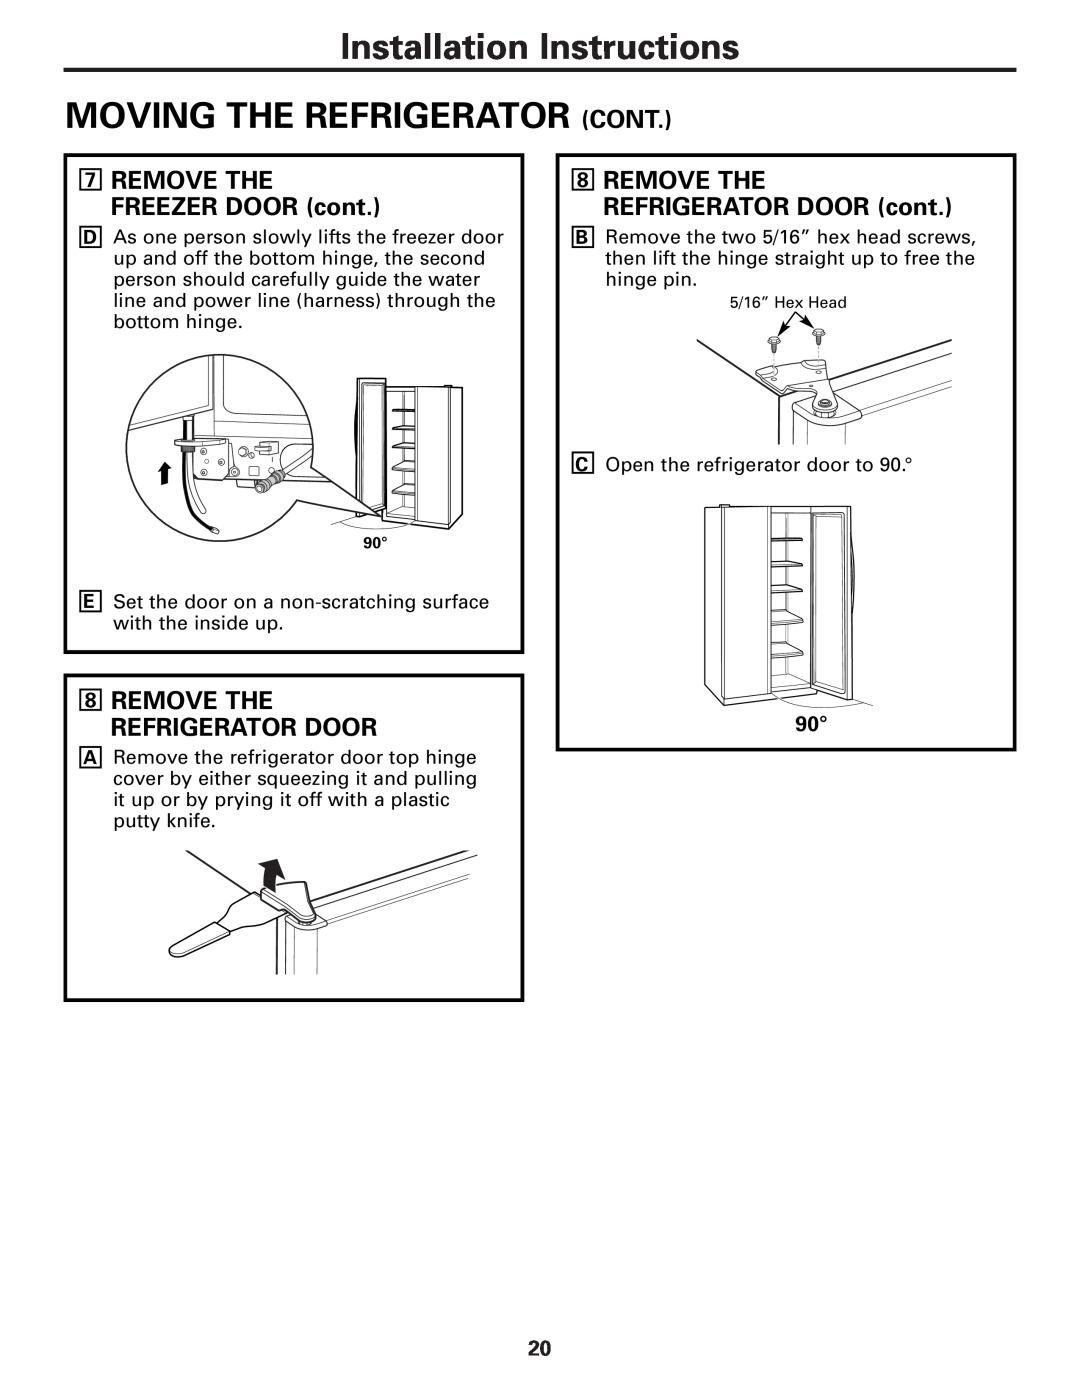 GE MODELS 23 AND 25 Installation Instructions MOVING THE REFRIGERATOR CONT, REMOVE THE FREEZER DOOR cont 